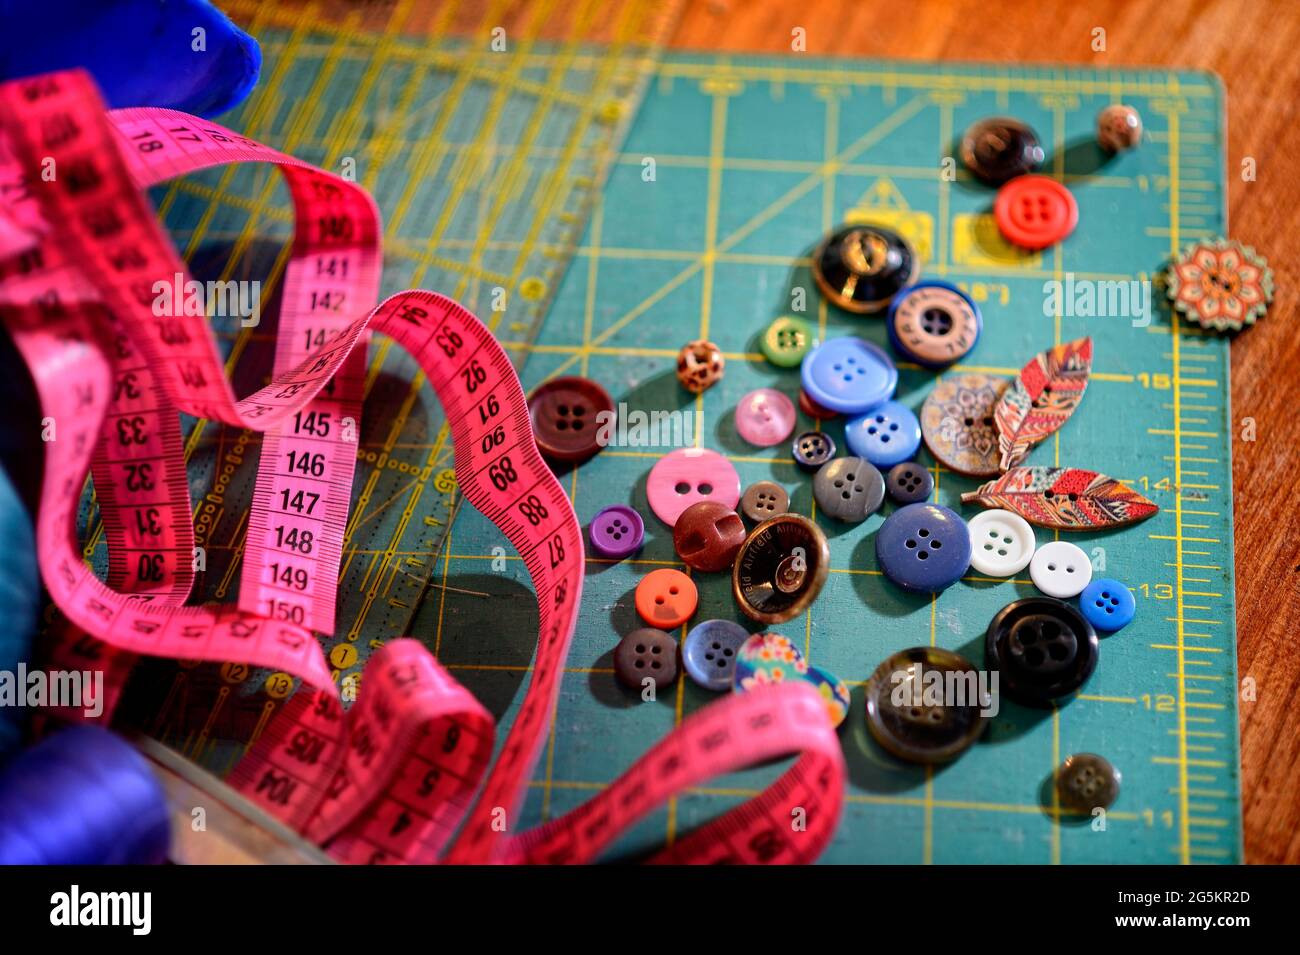 Tailor's workshop, thread, scissors, buttons, tape measure, Germany, Europe Stock Photo